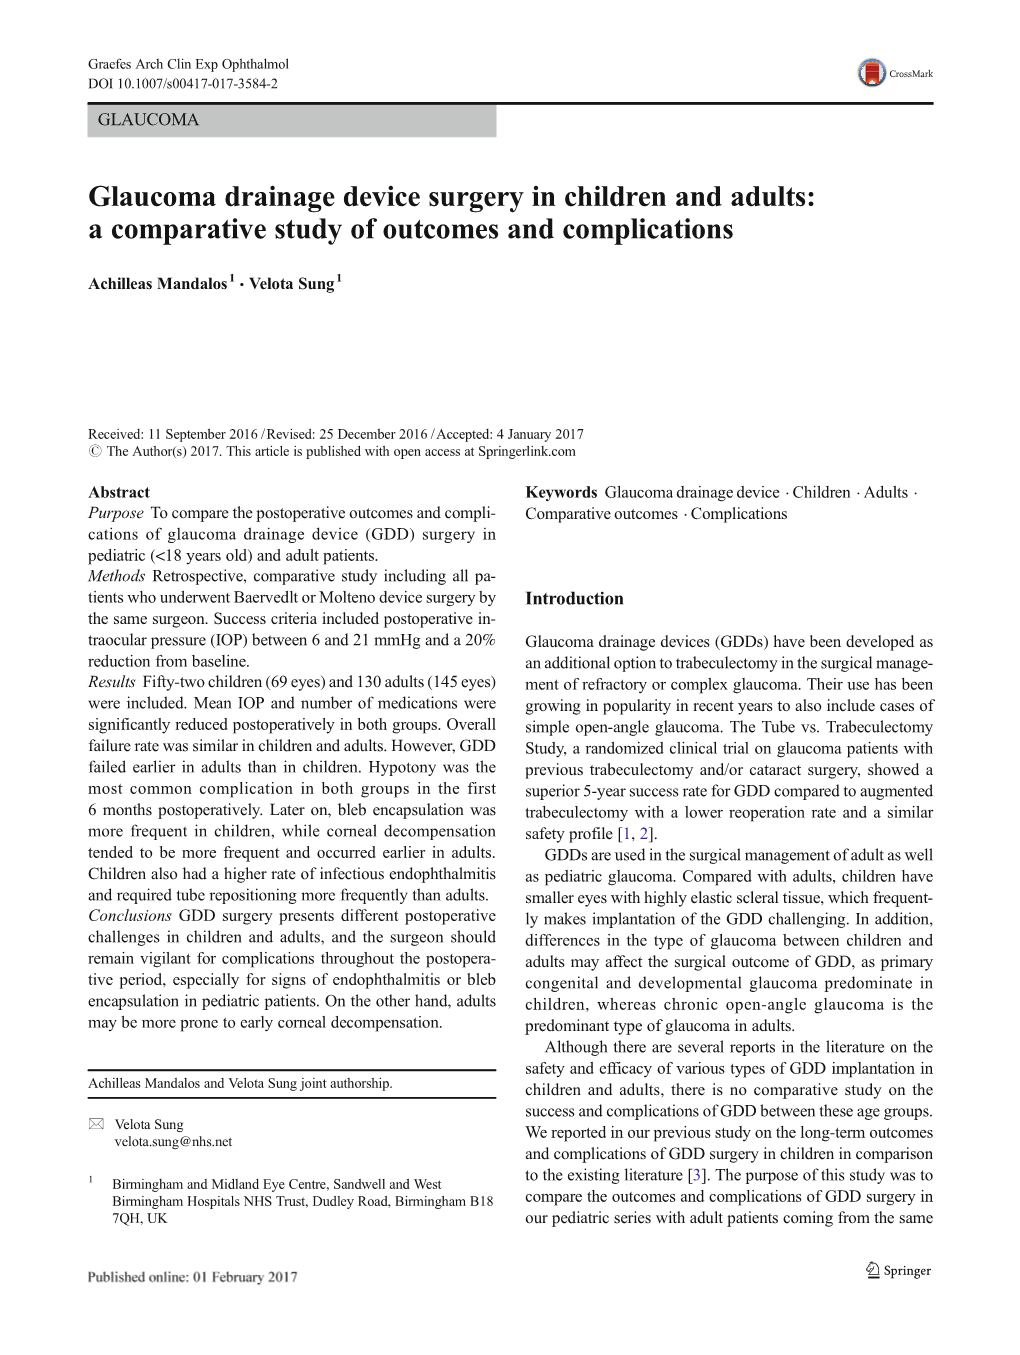 Glaucoma Drainage Device Surgery in Children and Adults: a Comparative Study of Outcomes and Complications